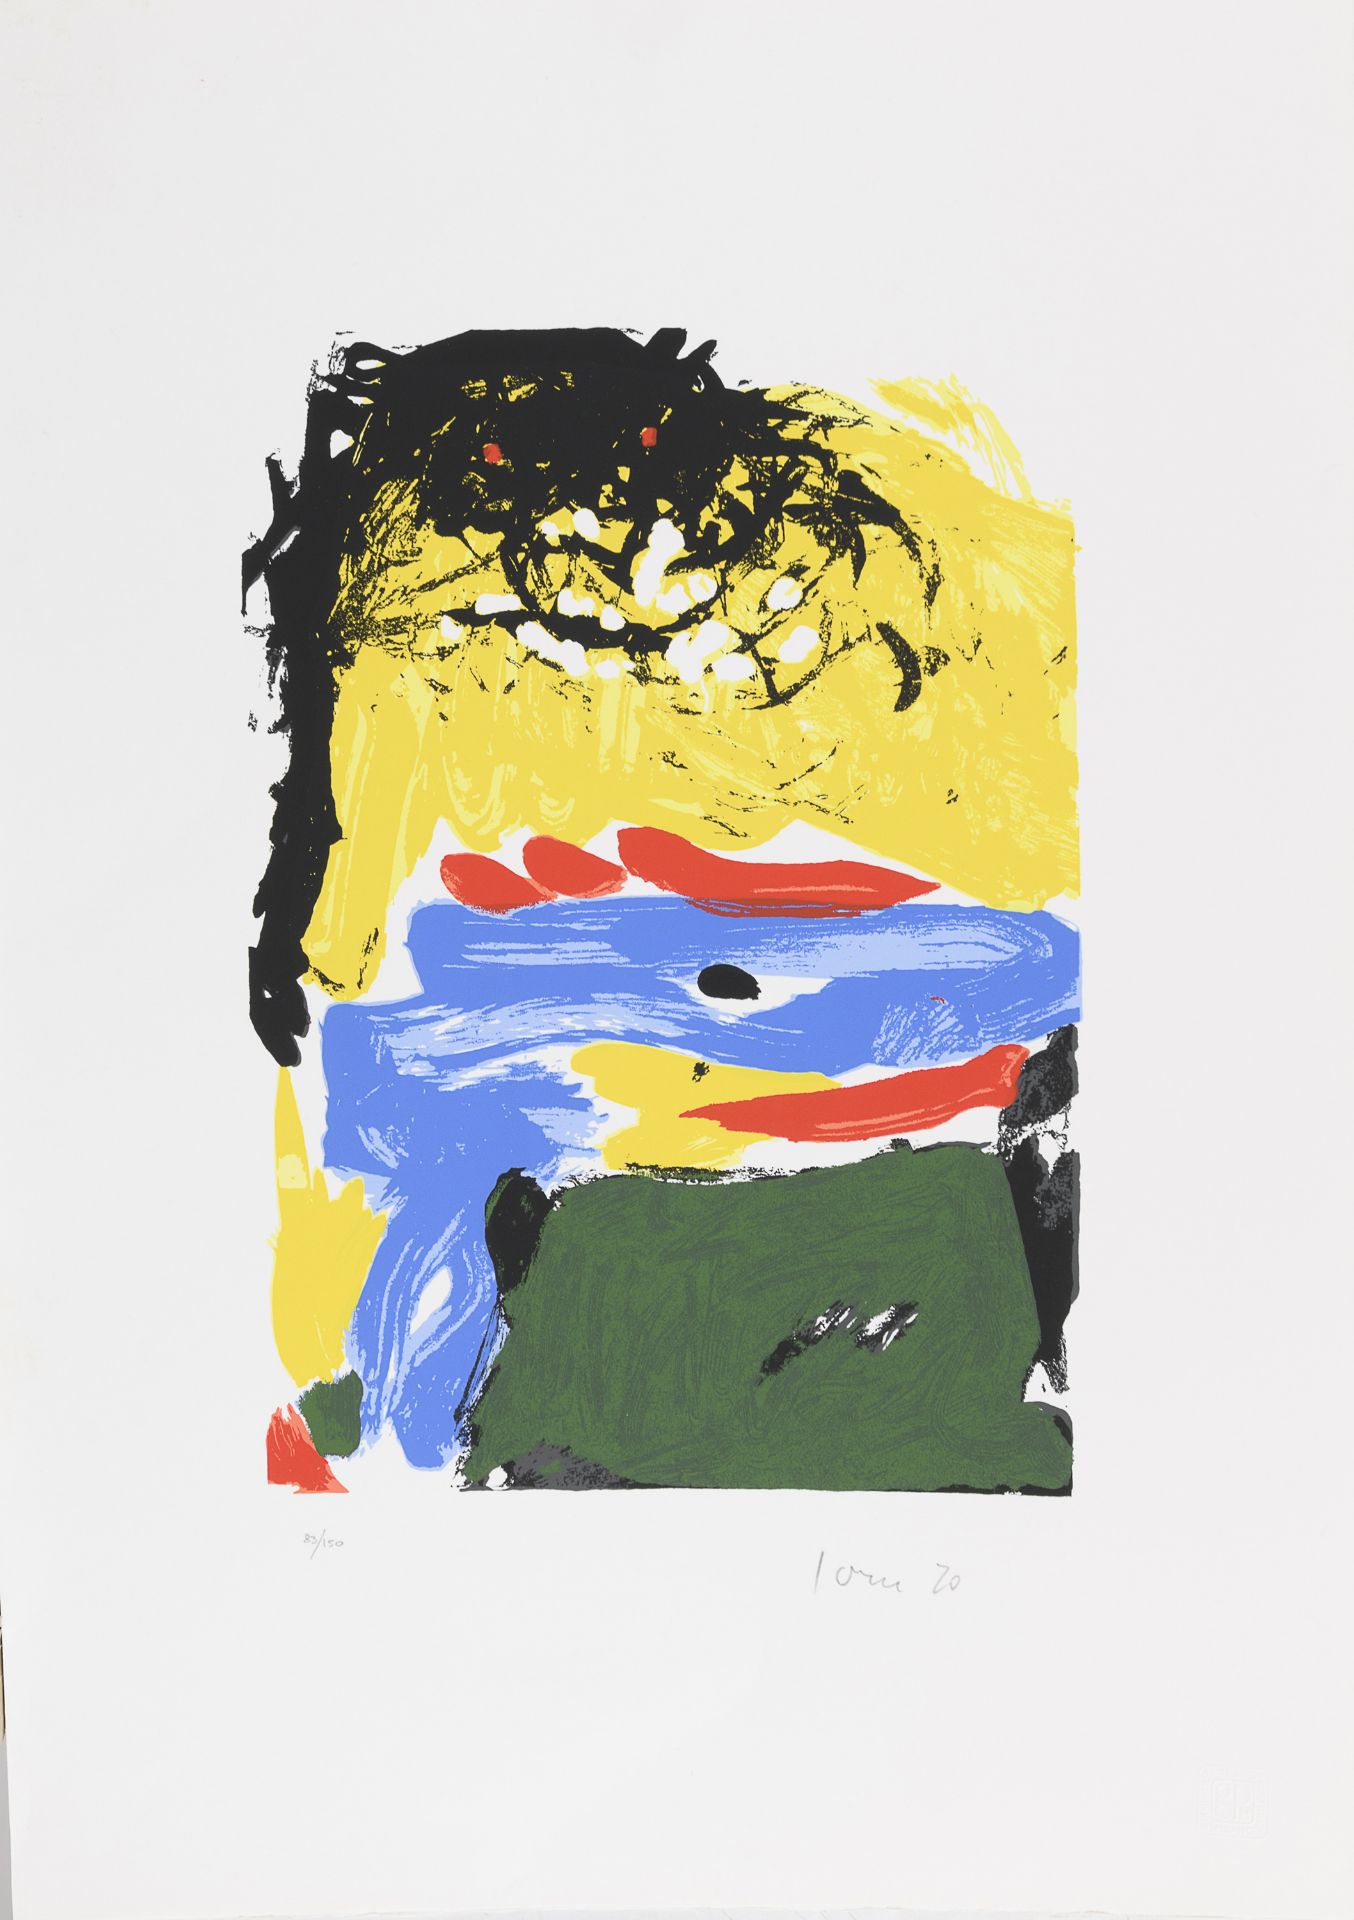 LITHOGRAPH BY ASGER JORN